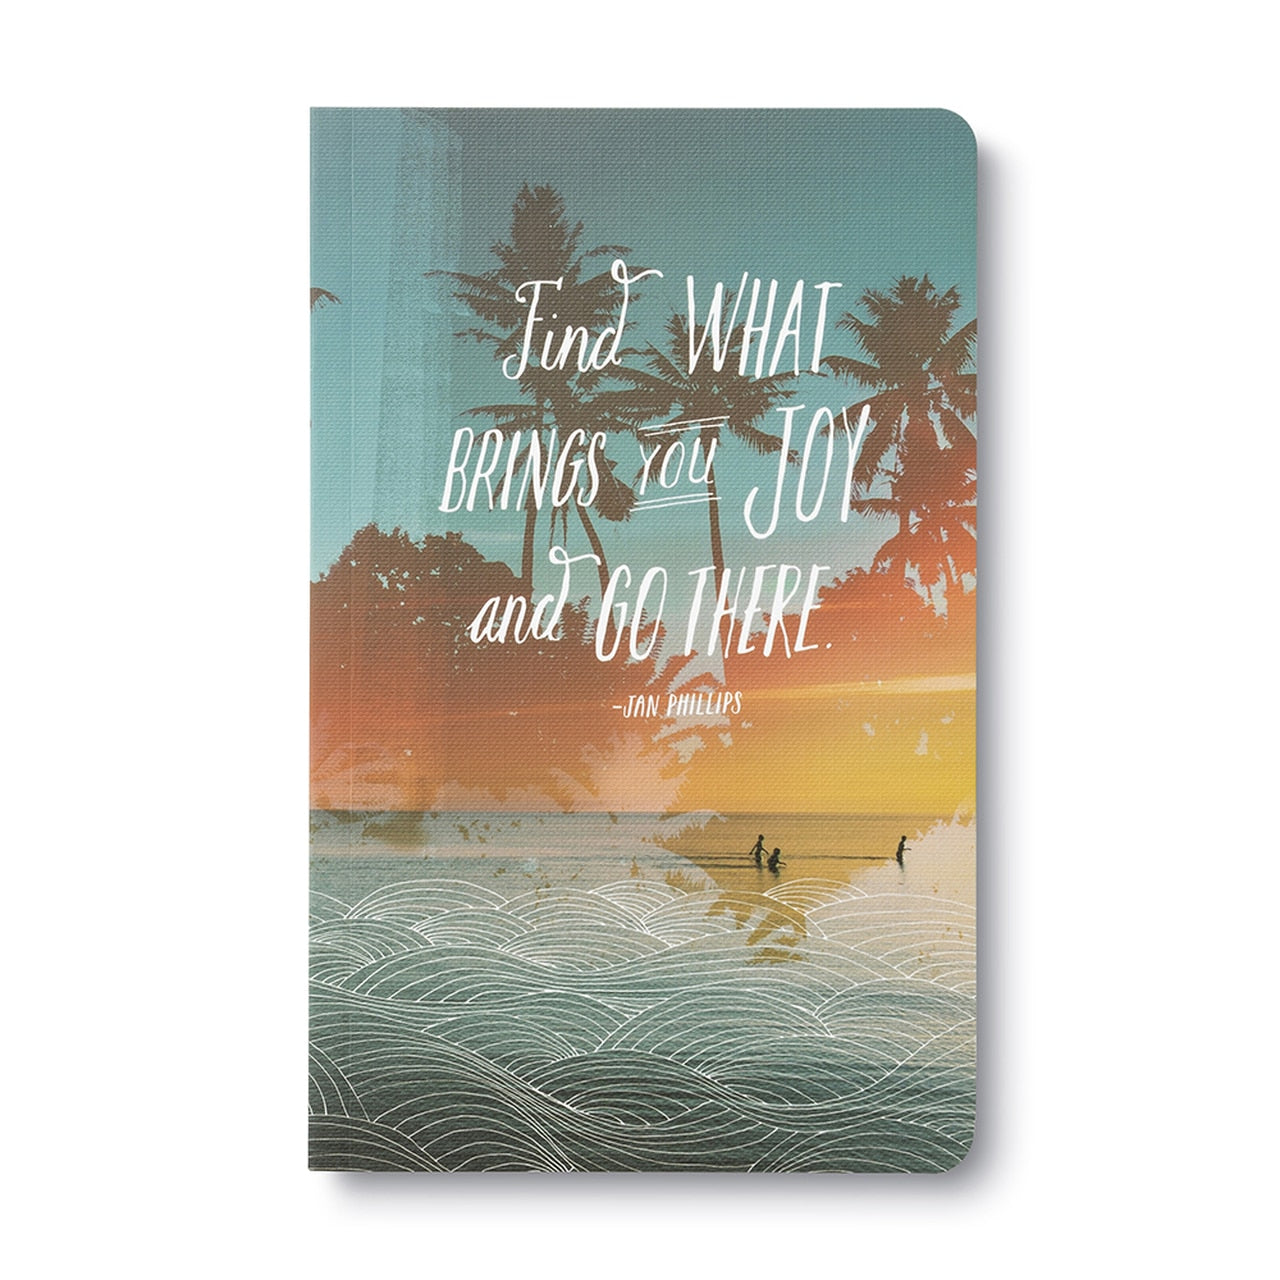 Journal "Find what Brings You Joyand Go There"